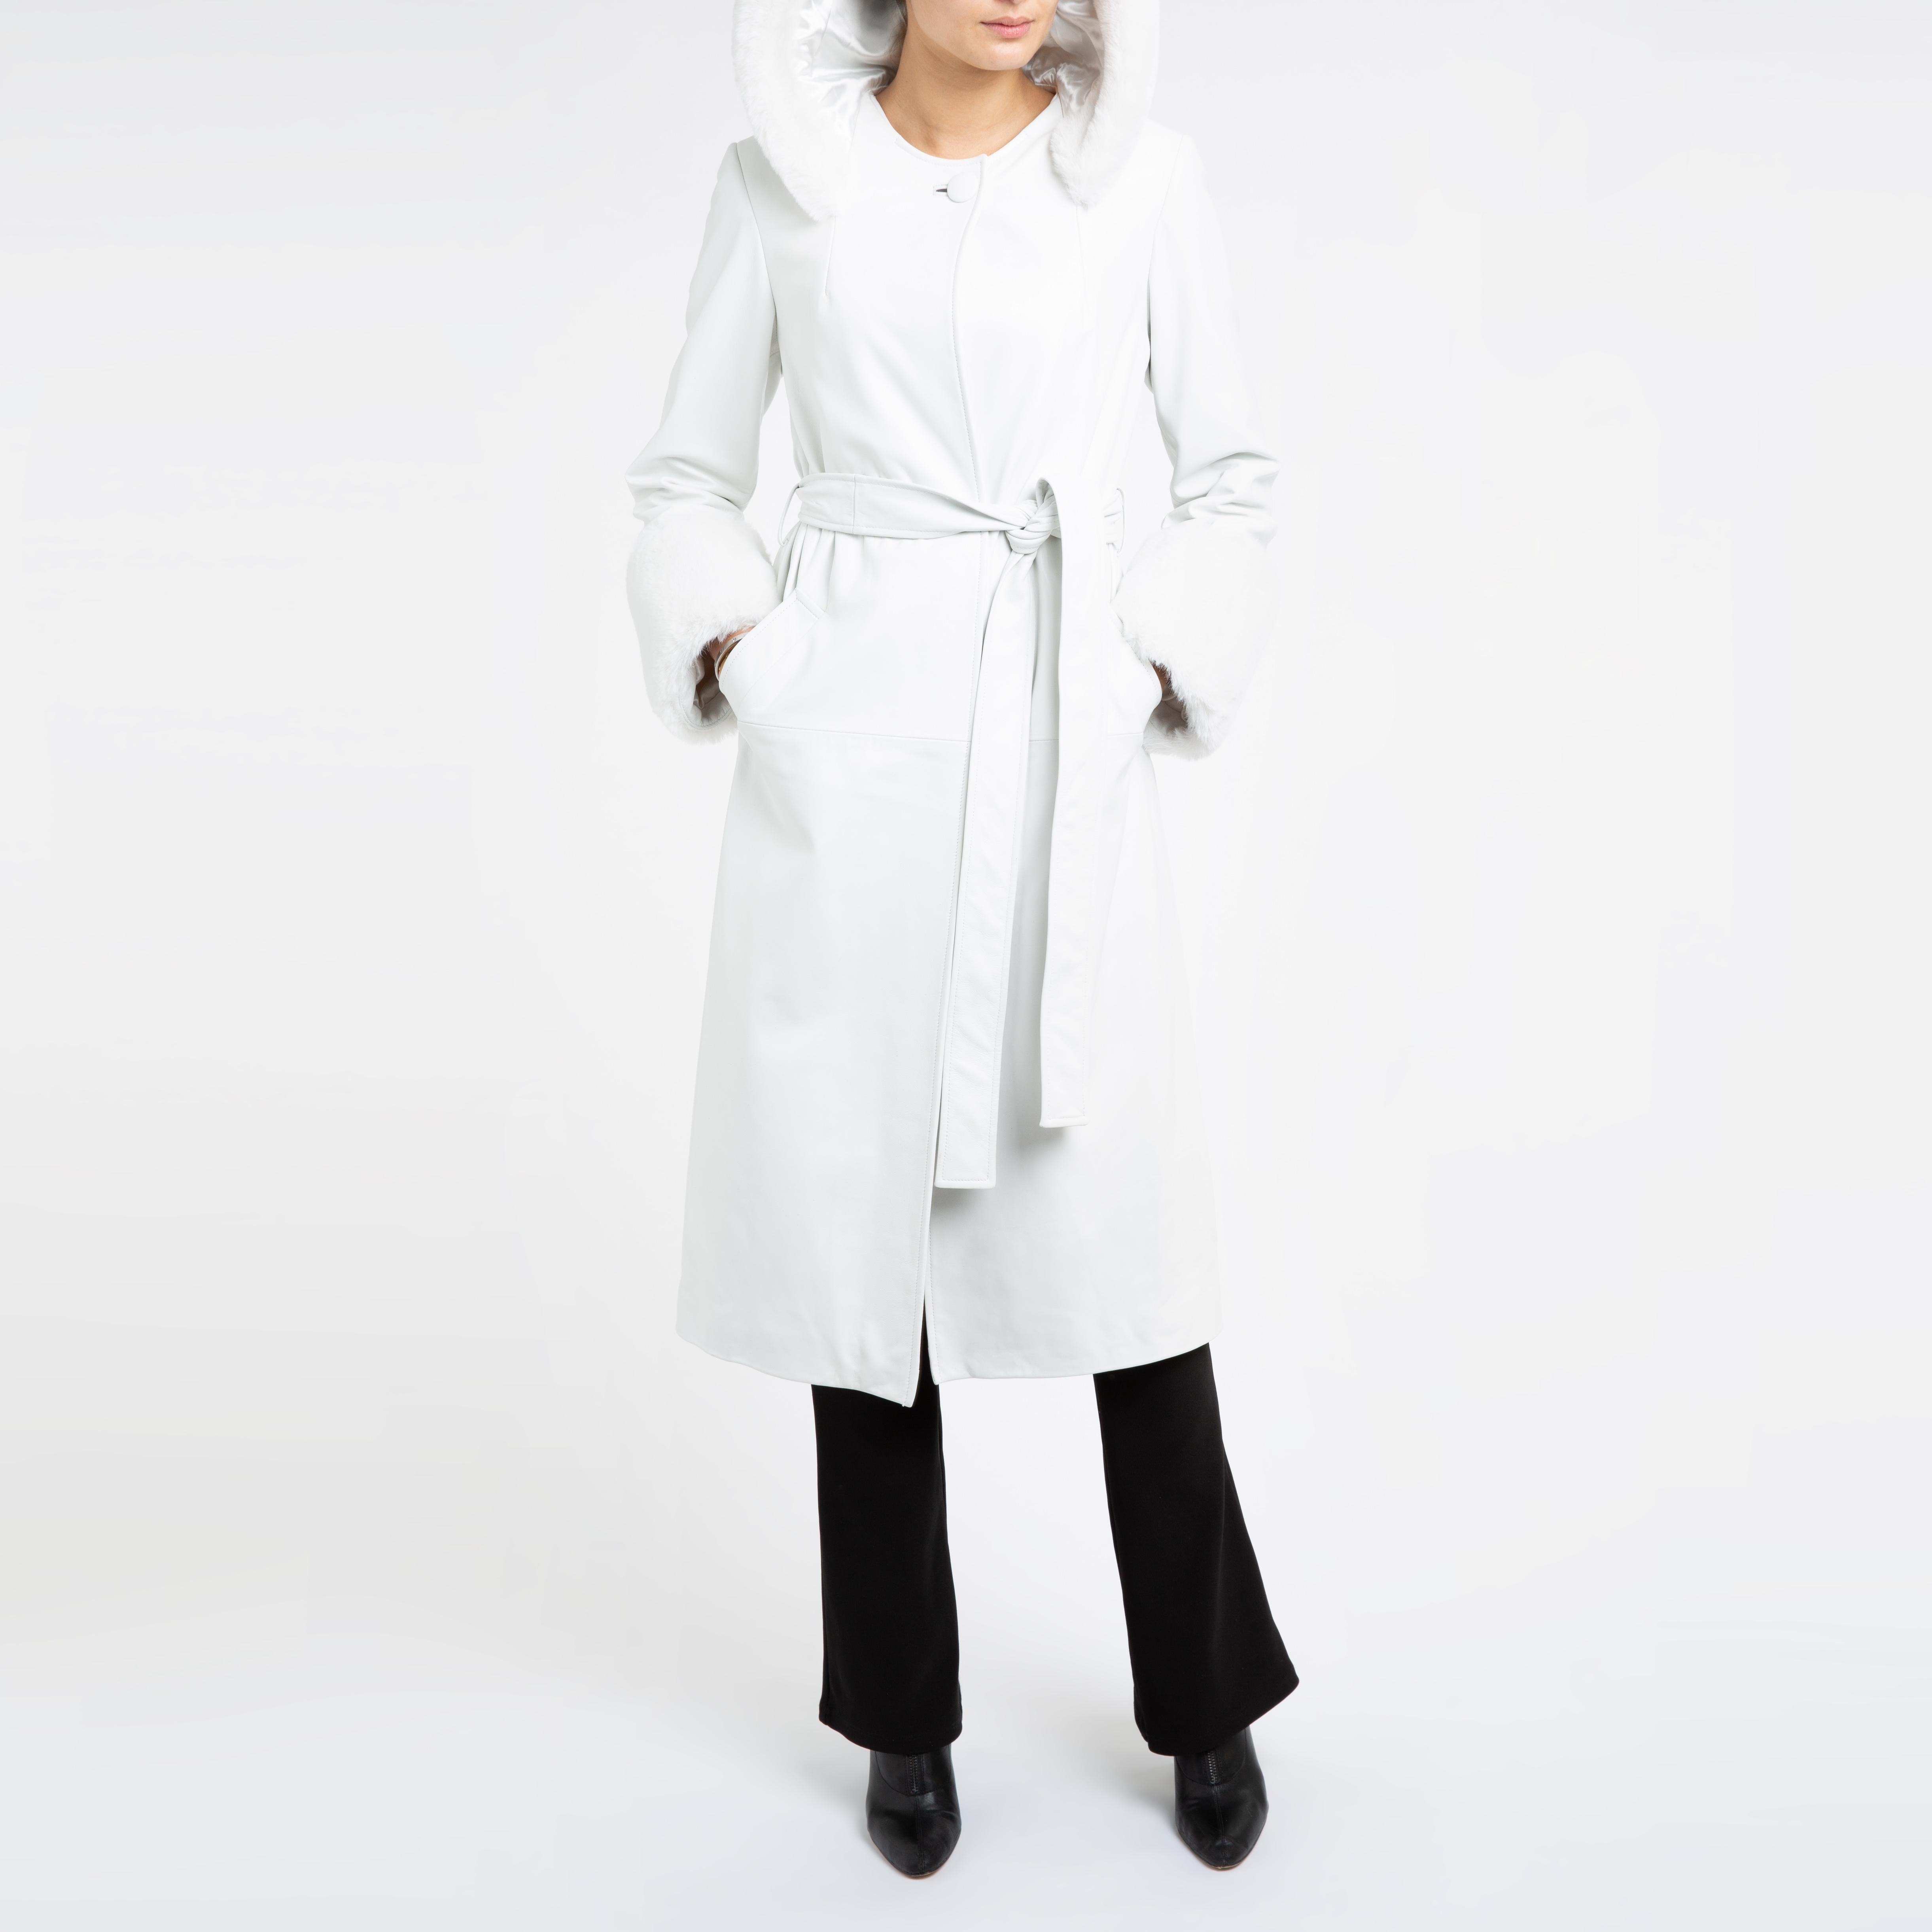 Verheyen Aurora Hooded Leather Trench Coat in White with Faux Fur - Size uk 12  For Sale 4